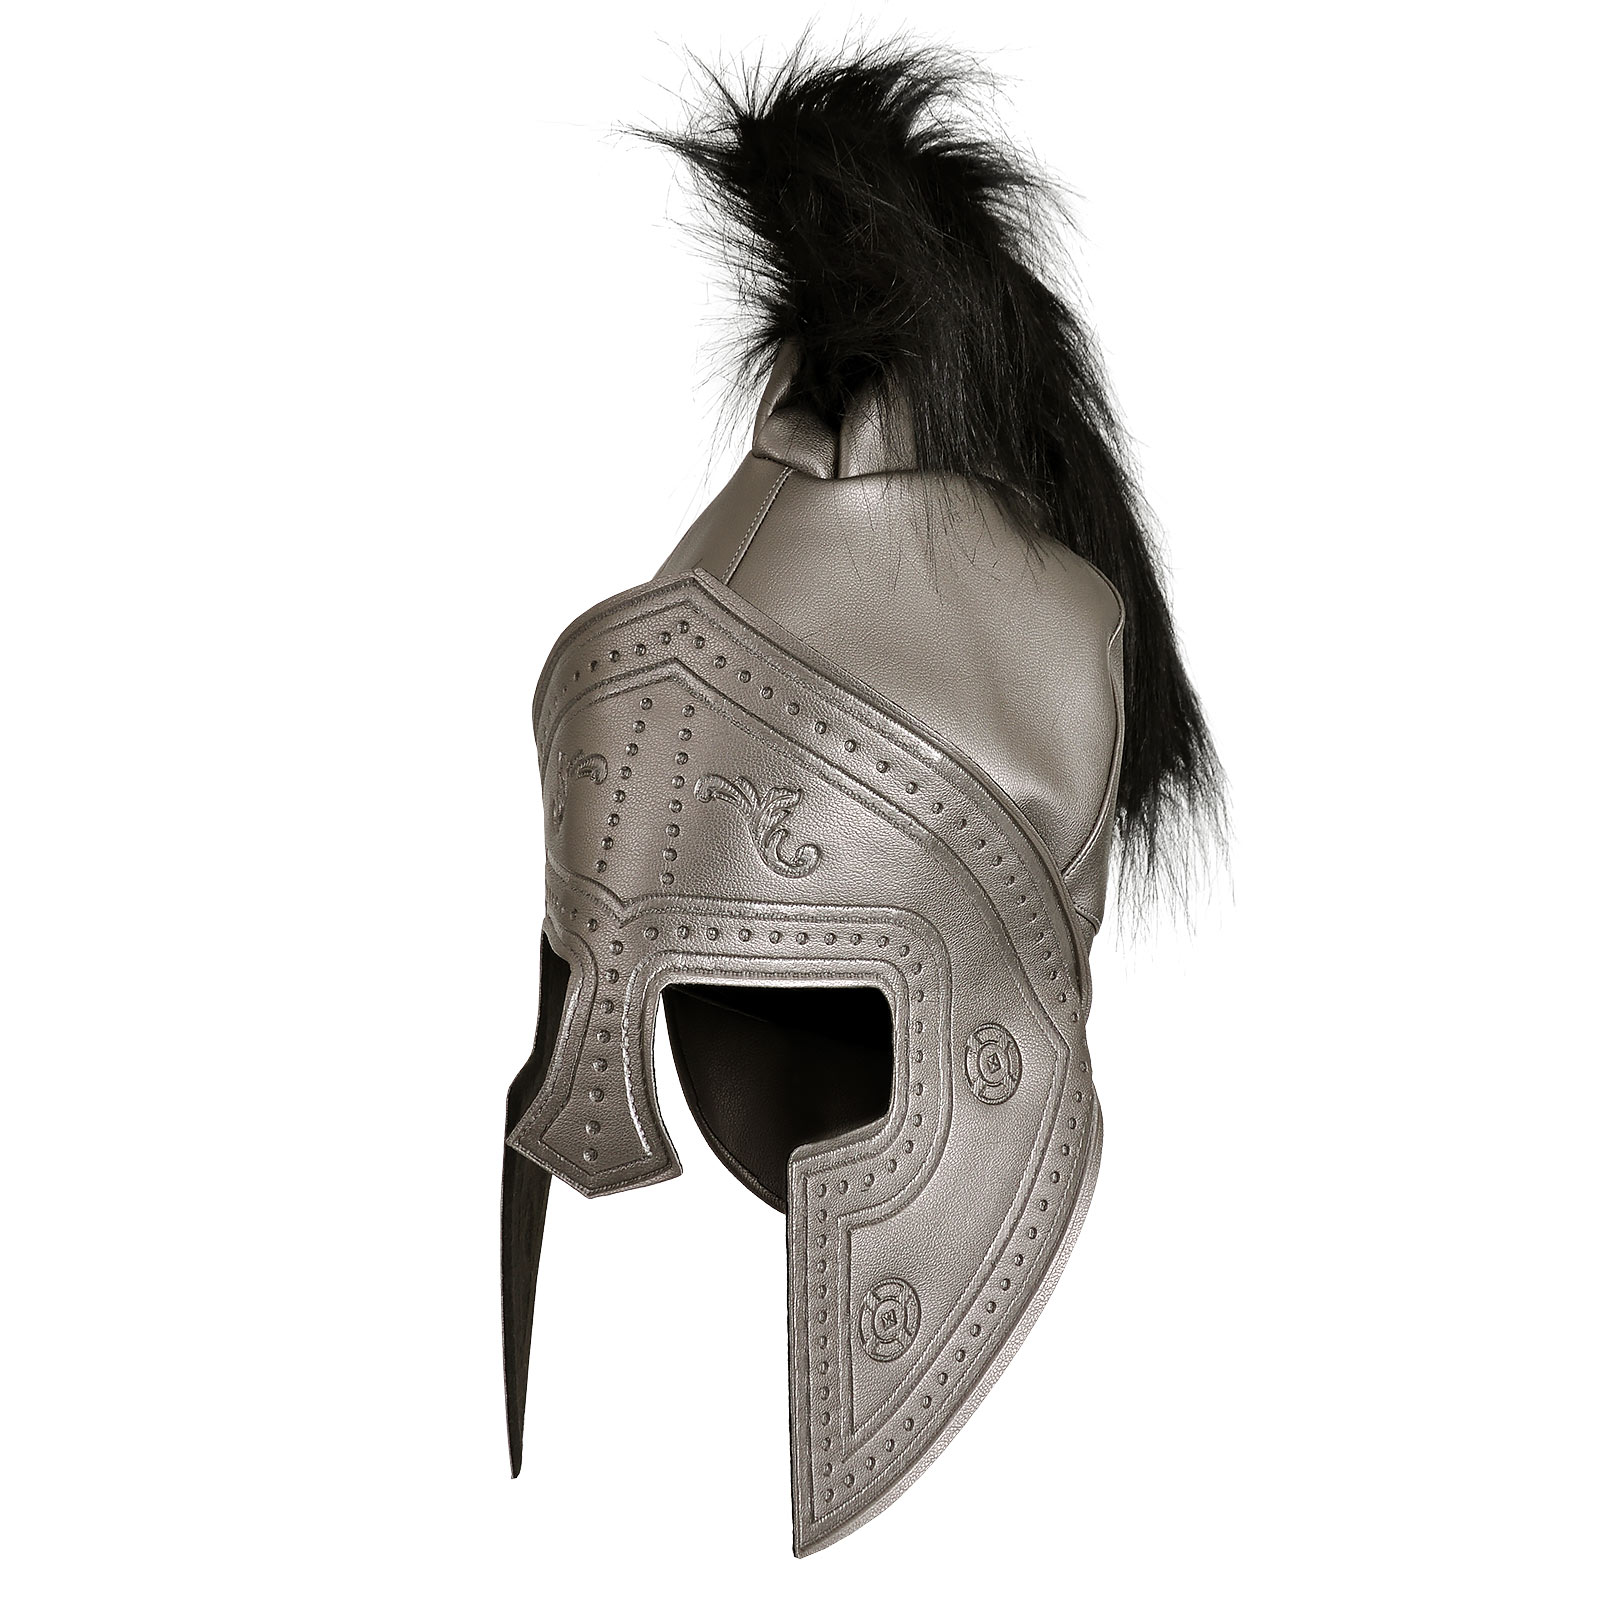 Knight's helmet with crest - costume accessory